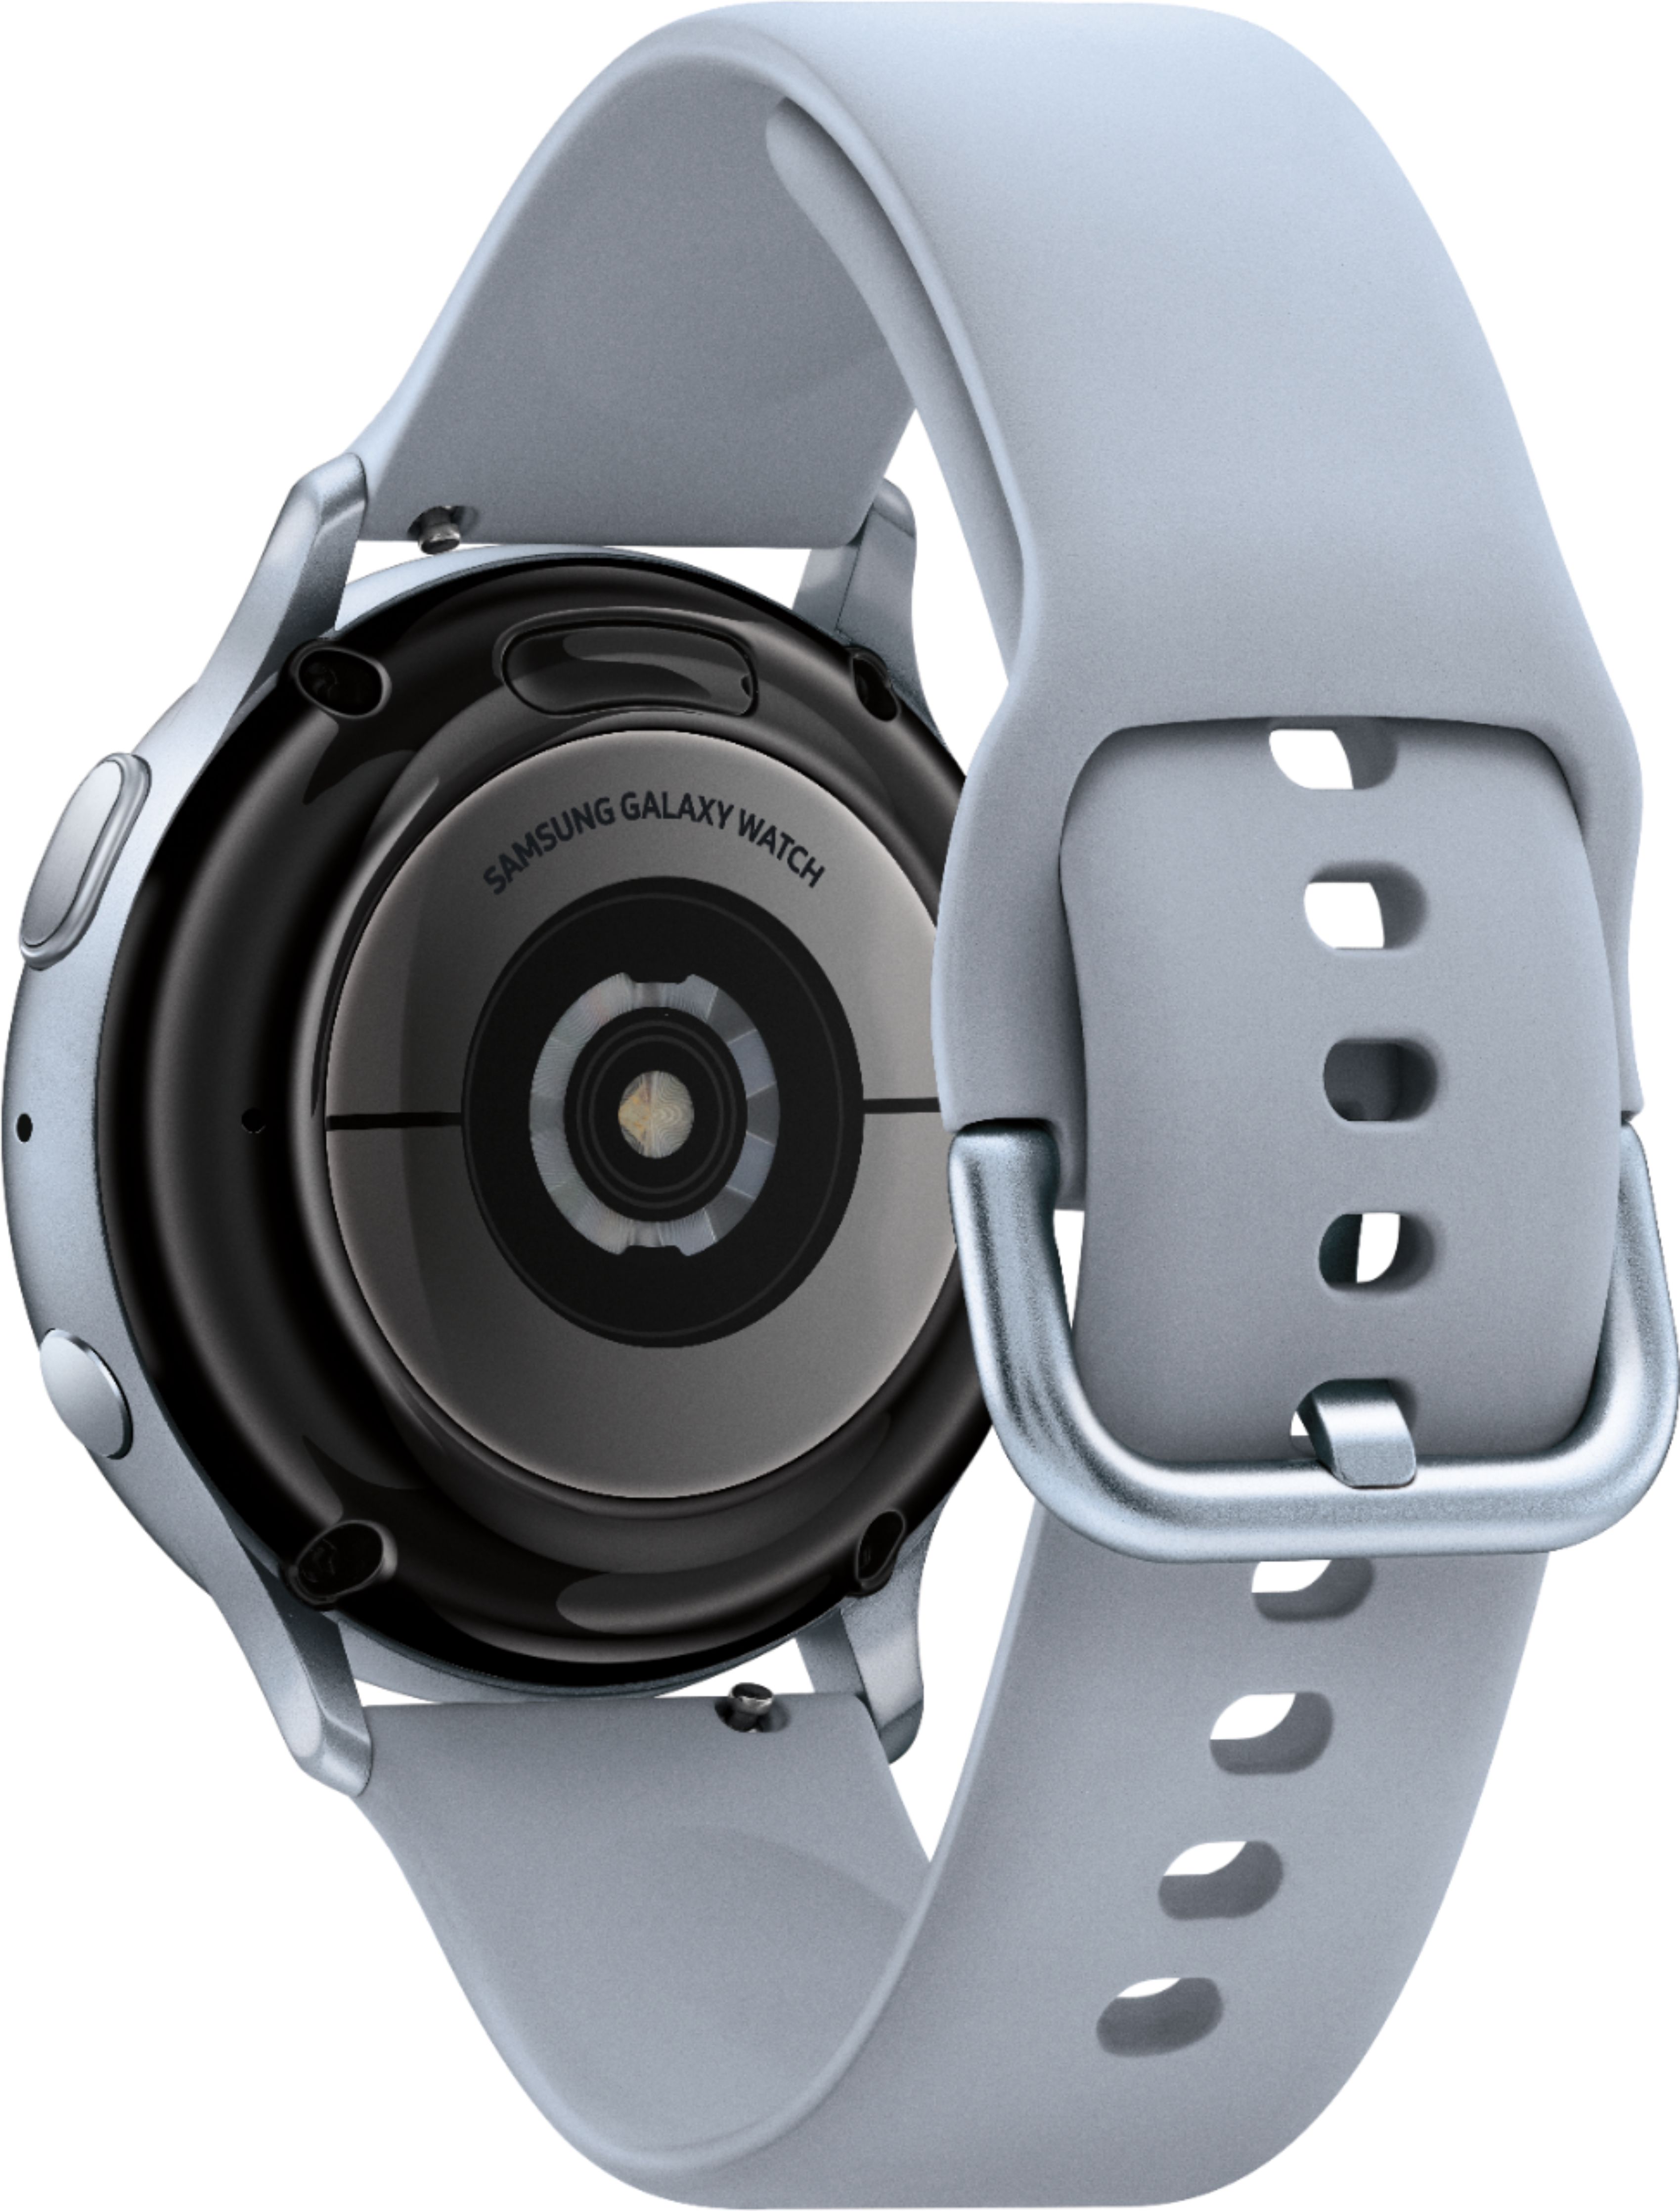 Samsung Galaxy Watch Active2 Smartwatch 40mm LTE in Silver - perforatedmetalsheets.com